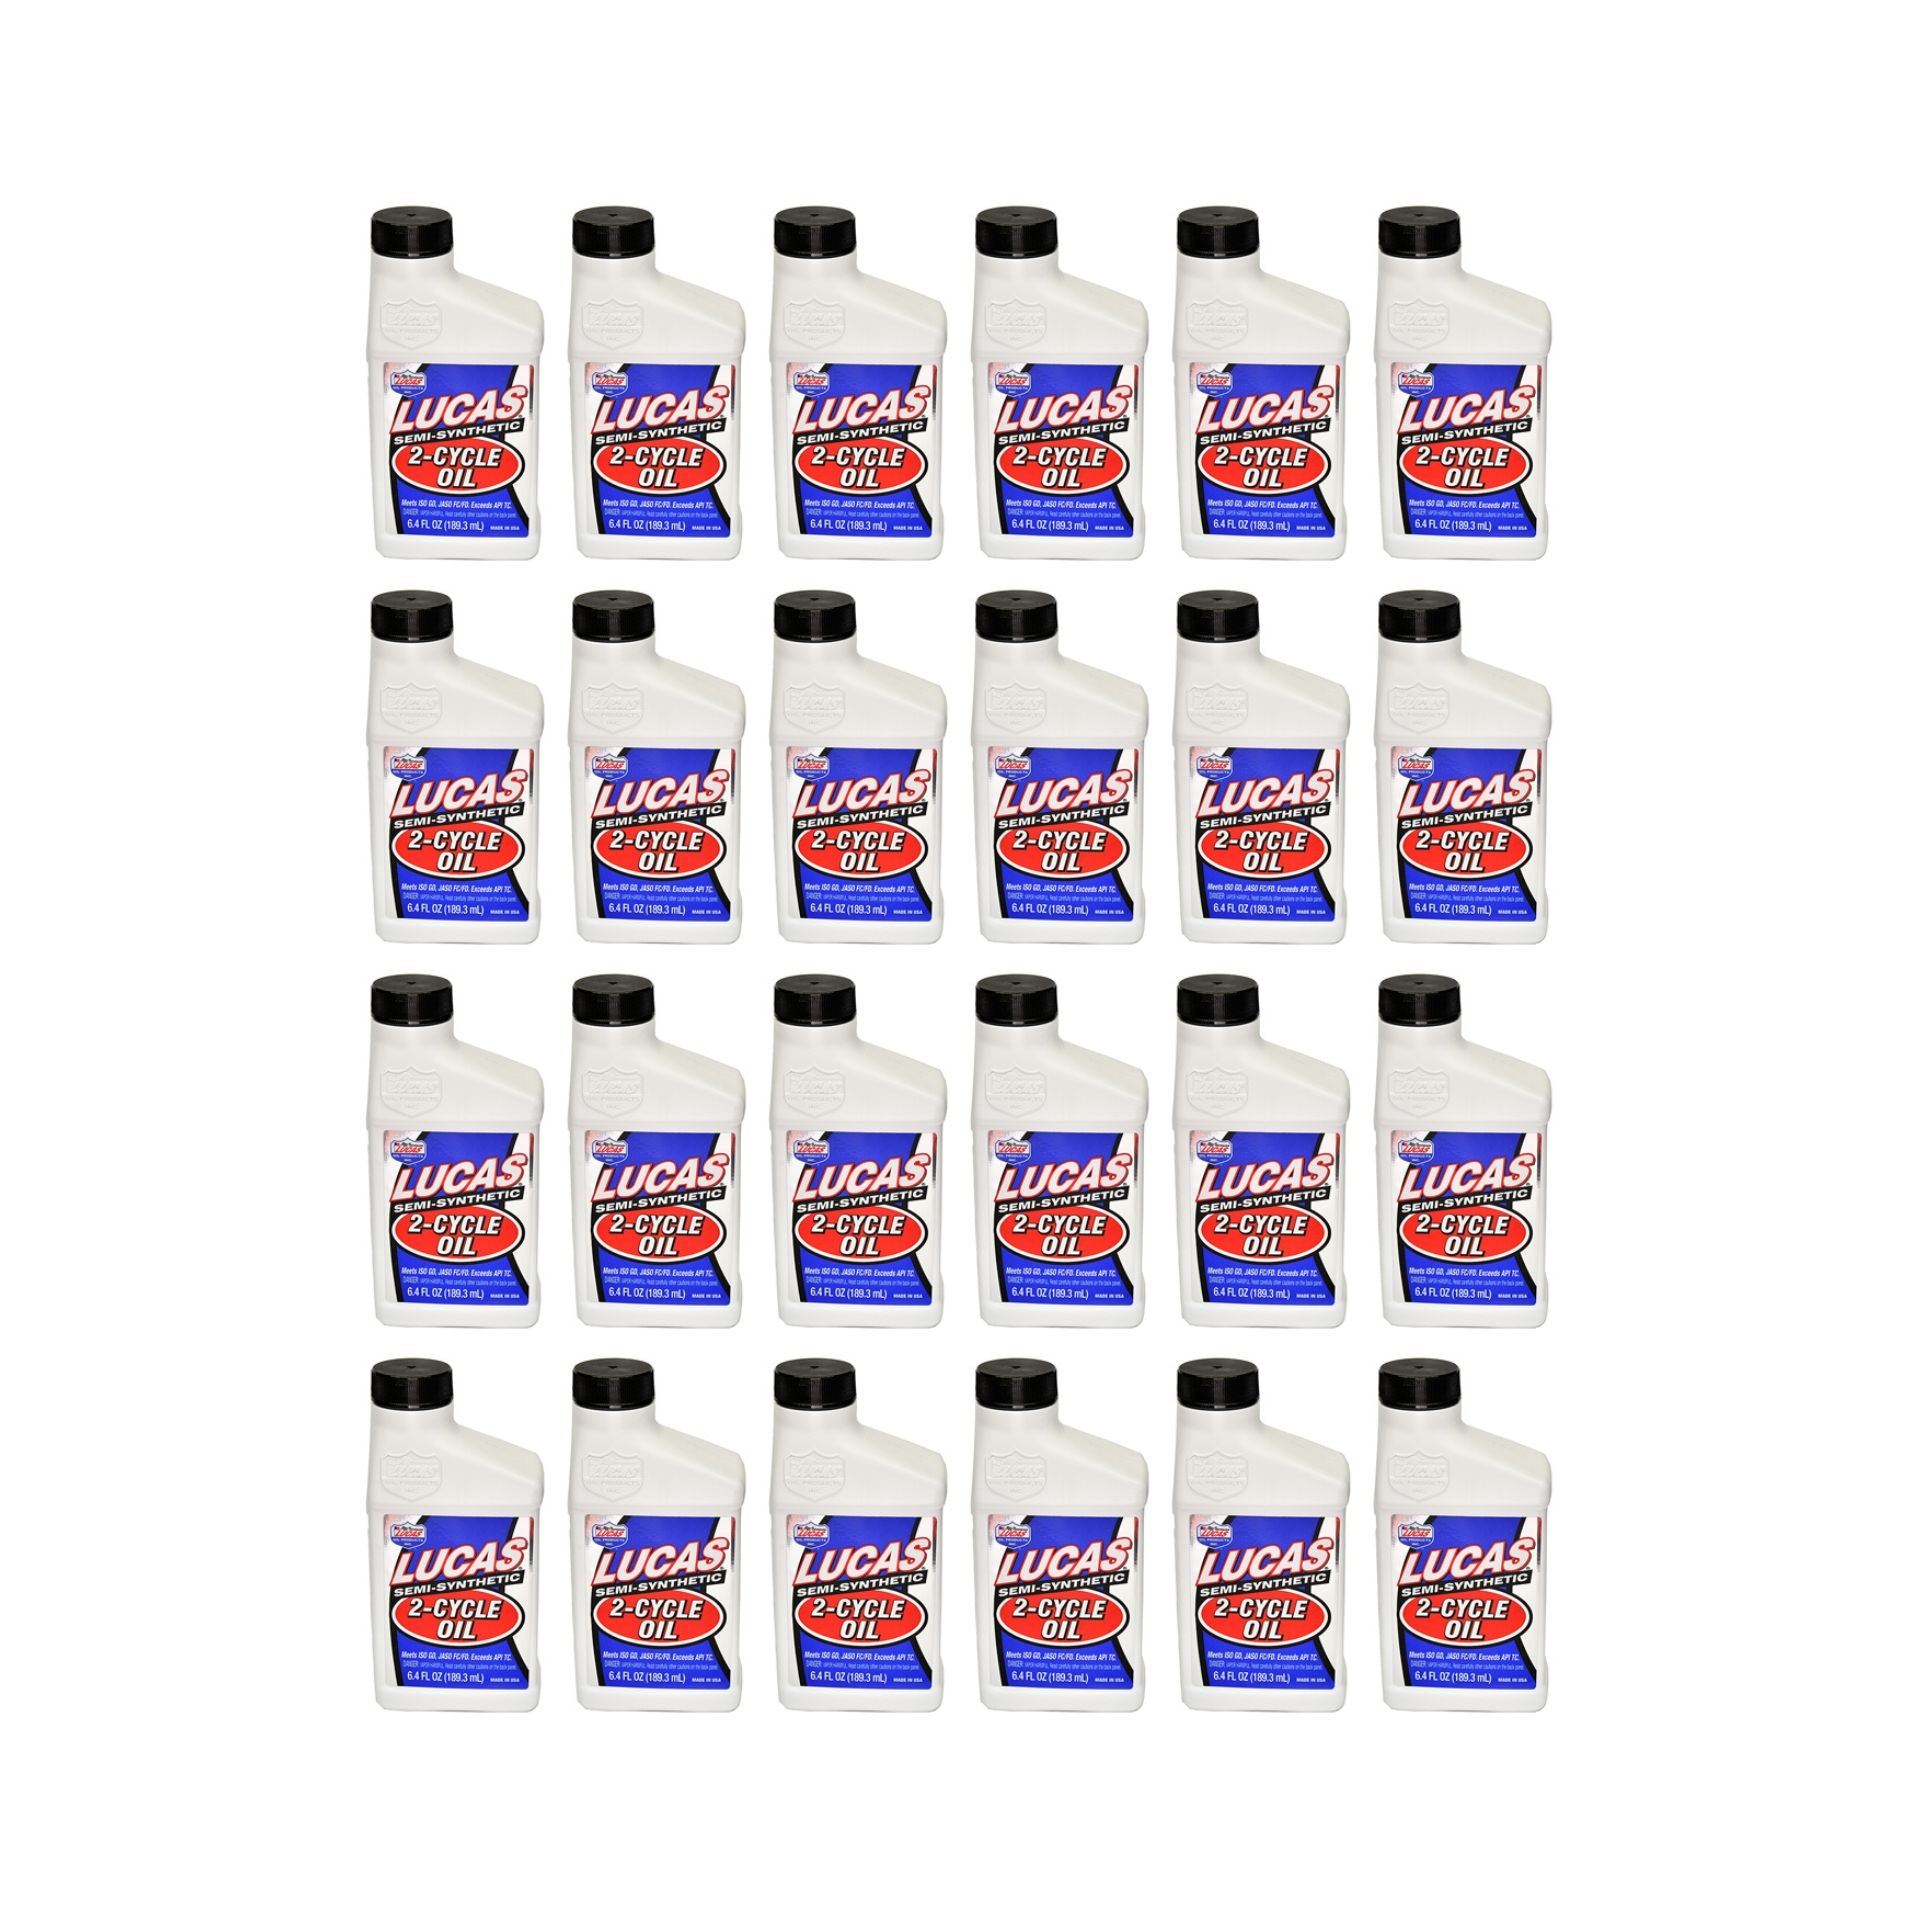 2-Cycle Oil Lucas Semi-Synthetic (Case of 24 6.4oz bottles)